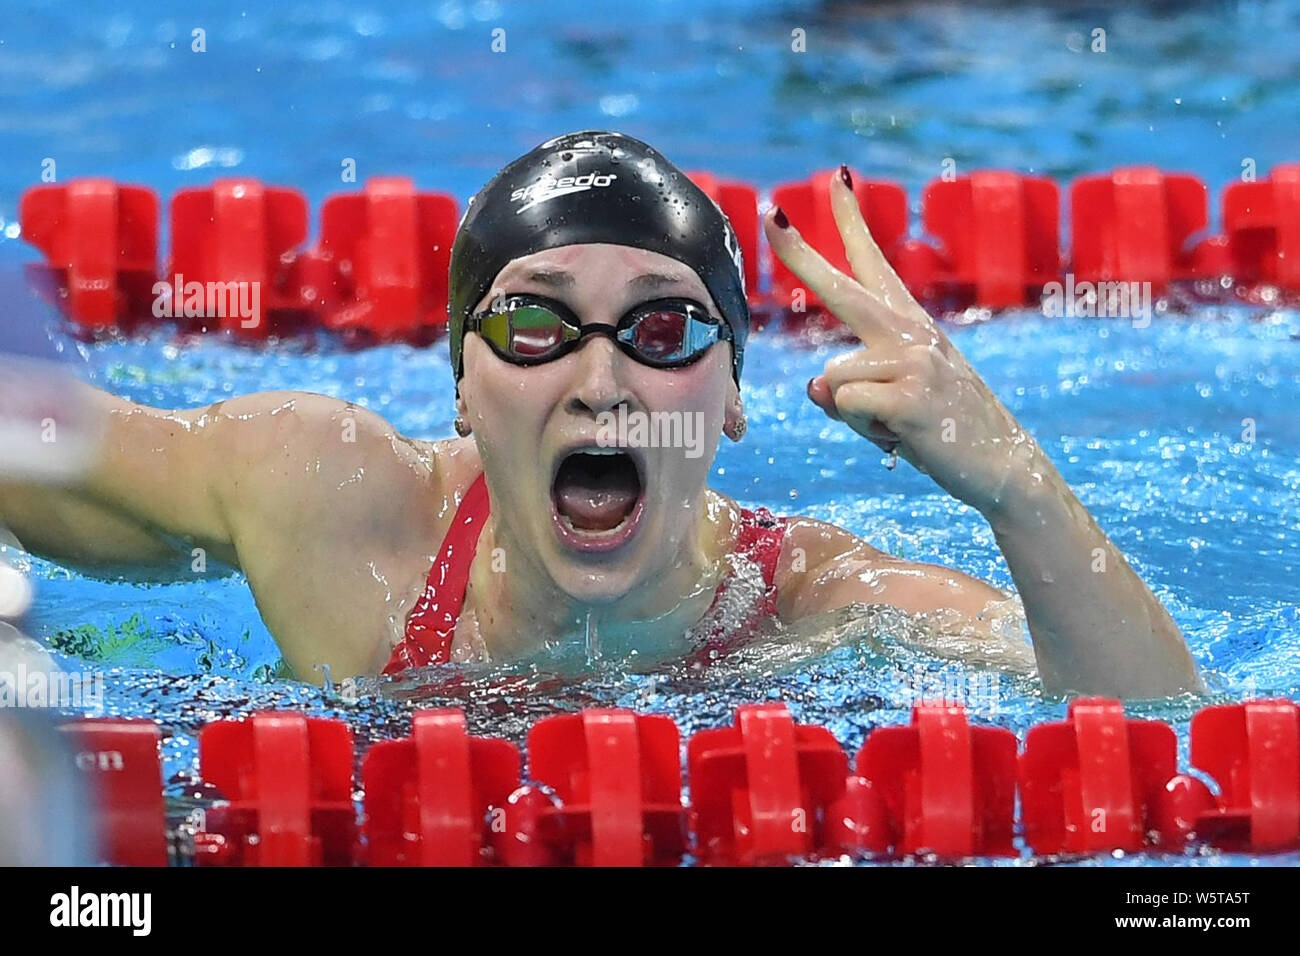 Annie Lazor of the USA celebrates after winning the Women's 200m Breaststroke Final at the 14th FINA World Swimming Championships (25m) in Hangzhou ci Stock Photo